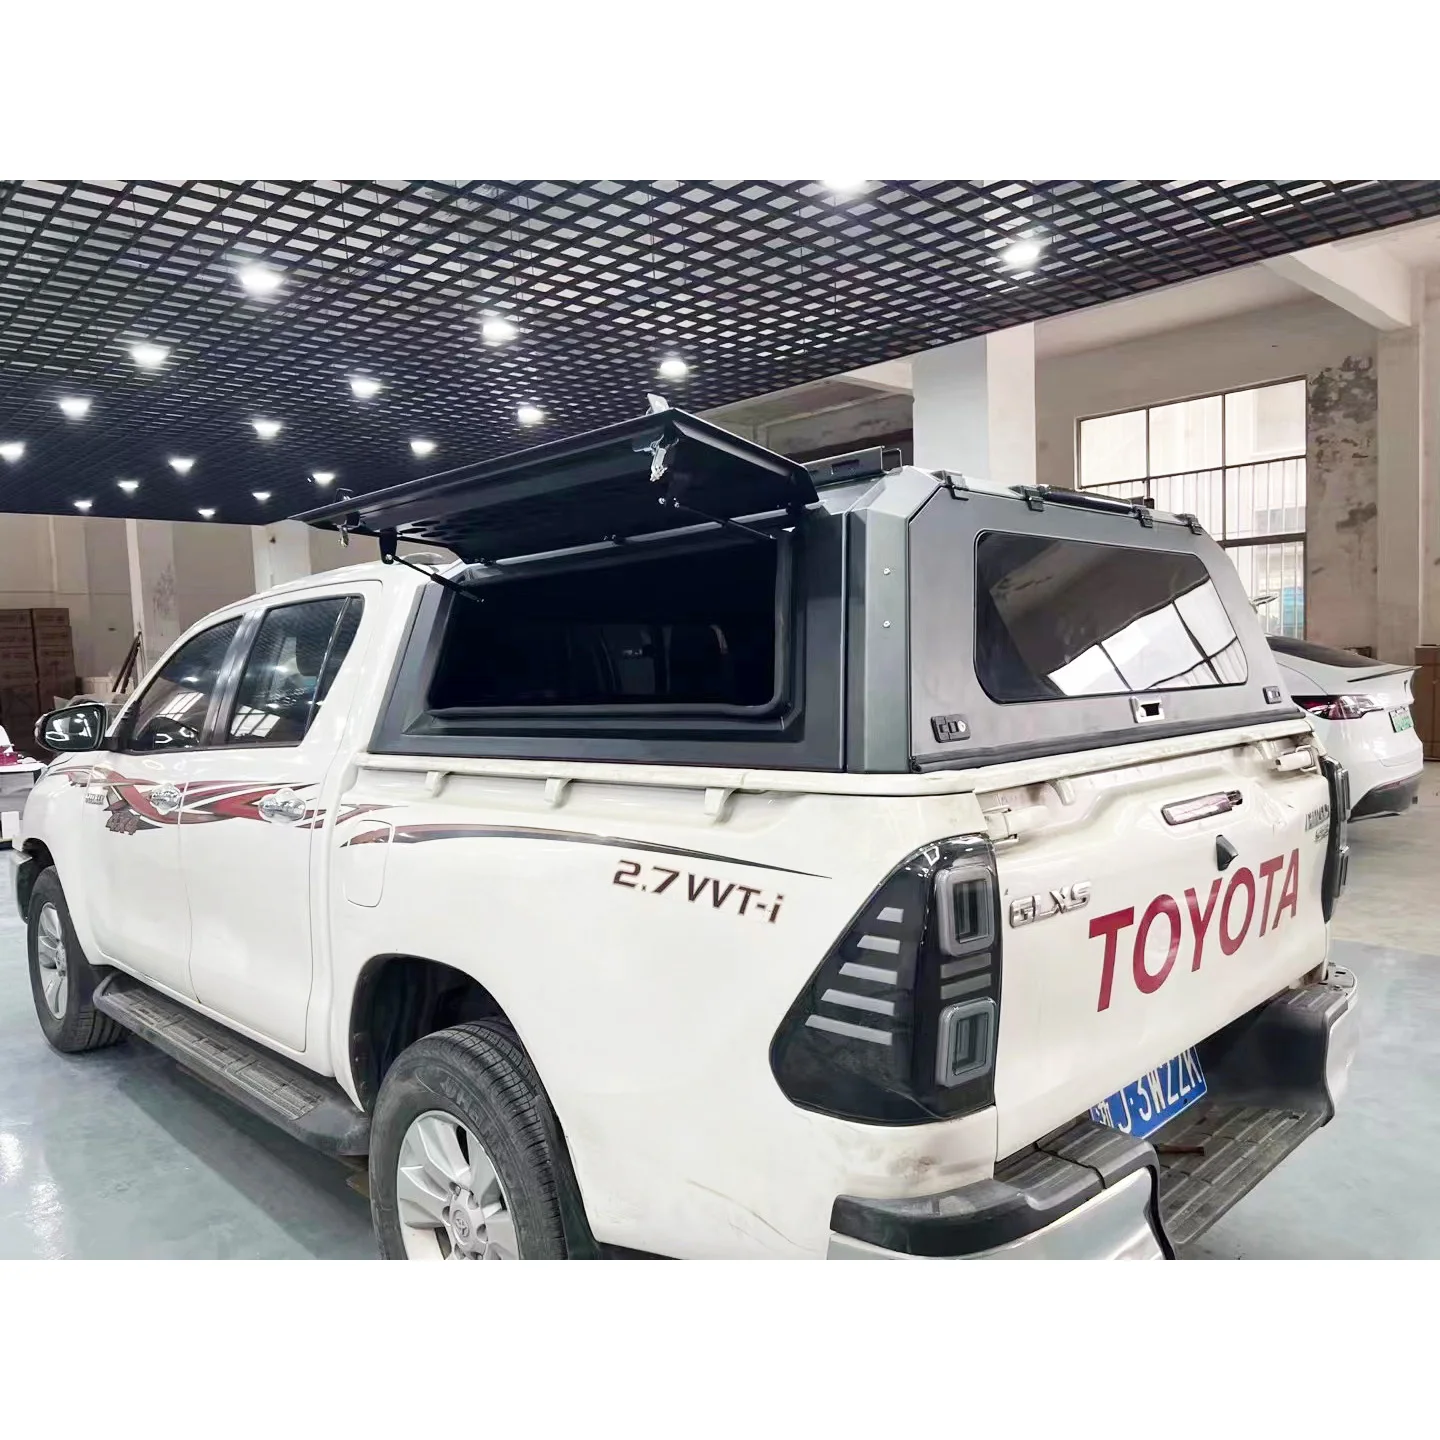 

Tailored sizes anti rusted waterproof aluminum canopy for TOYOTA HILUX tonneau cover modify upgrade hard top camper shell